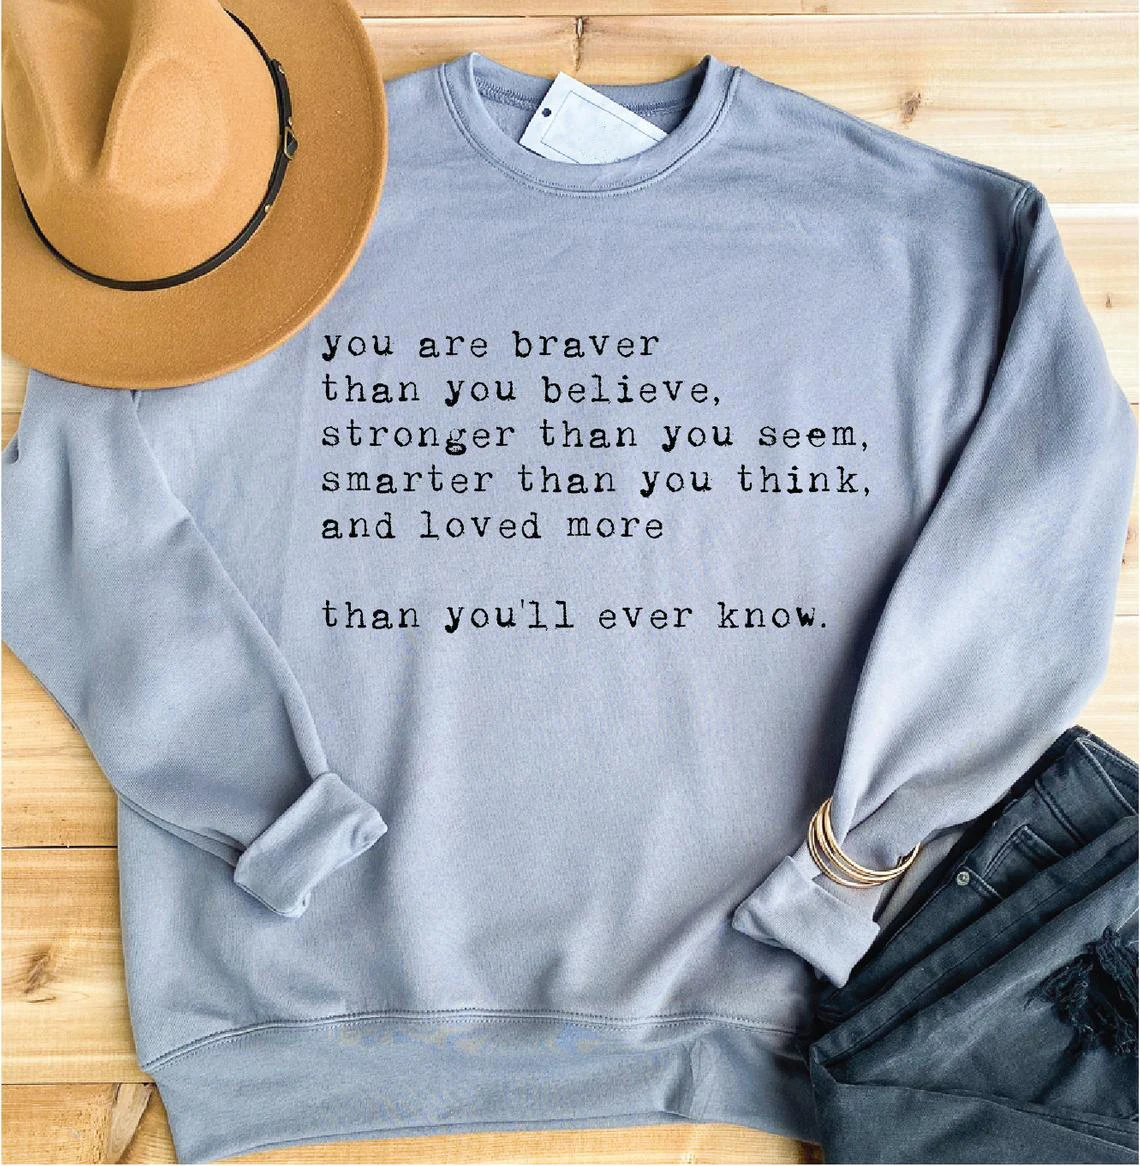 

You are braver than you believe sweatshirt pure cotton funny slogan vintage Christian Bible baptism pullovers young tops L485